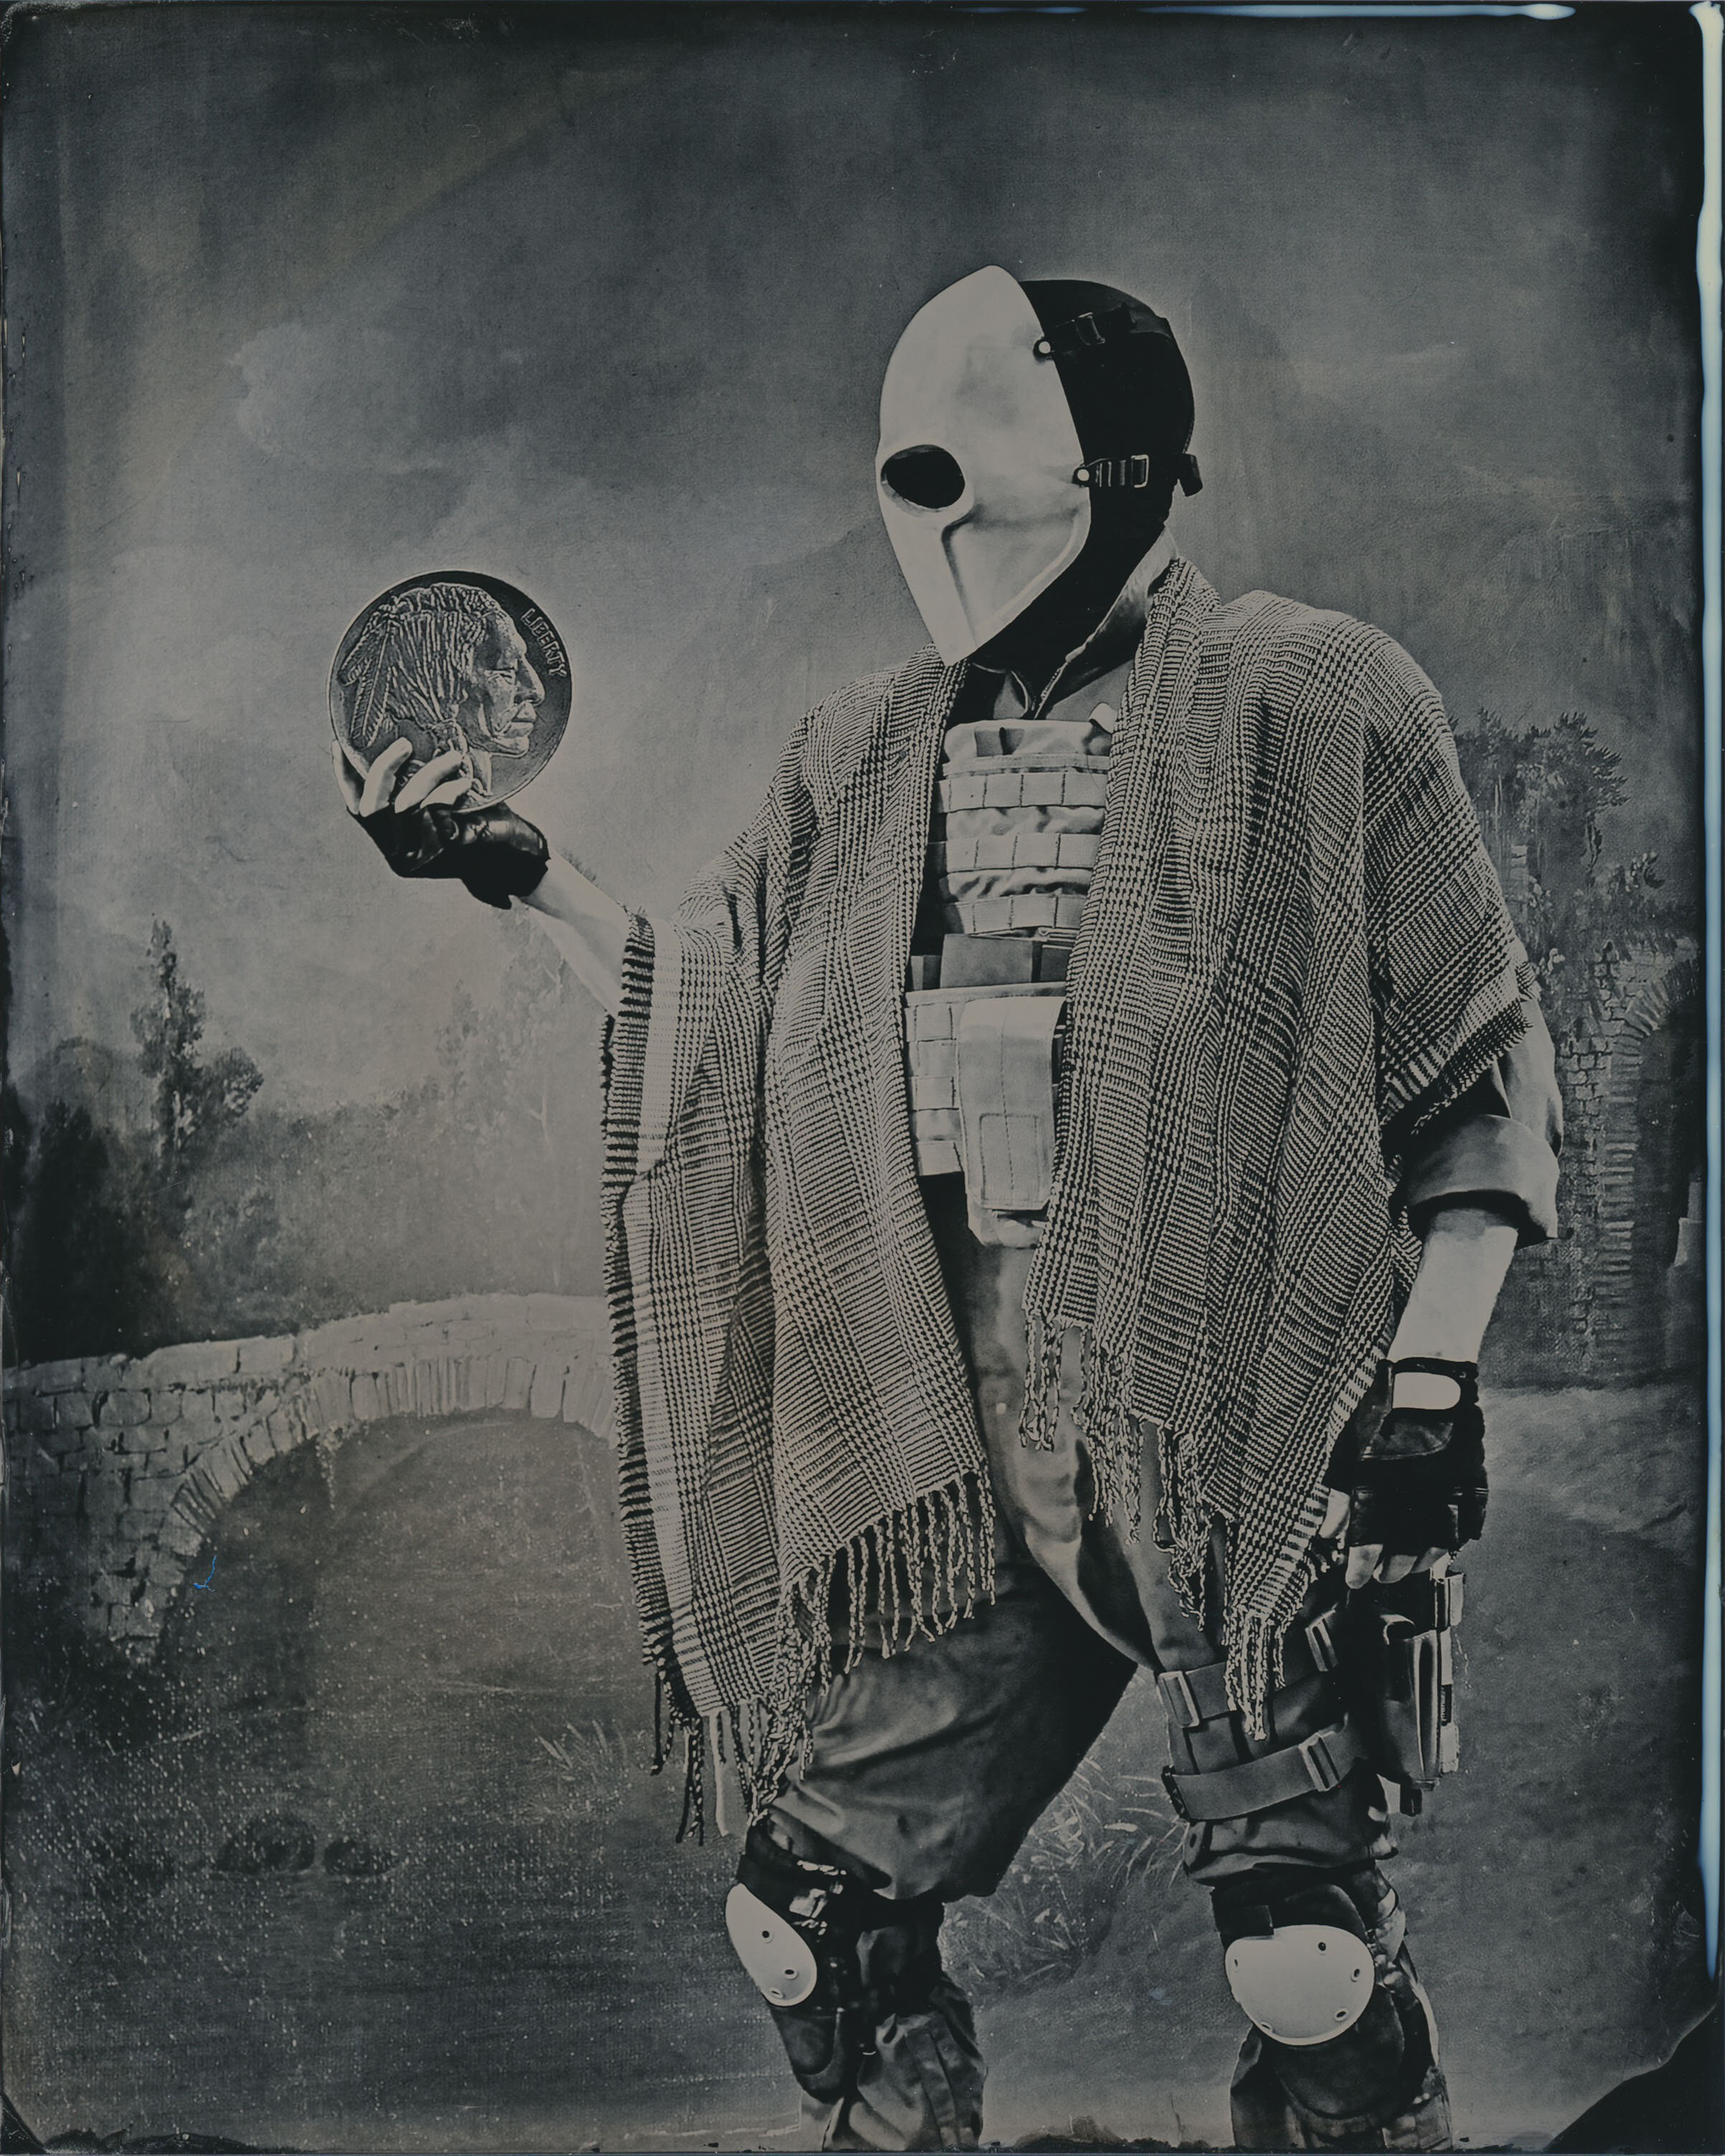   “Knight of Coins”   2021  Wet Plate Collodion  8x10 